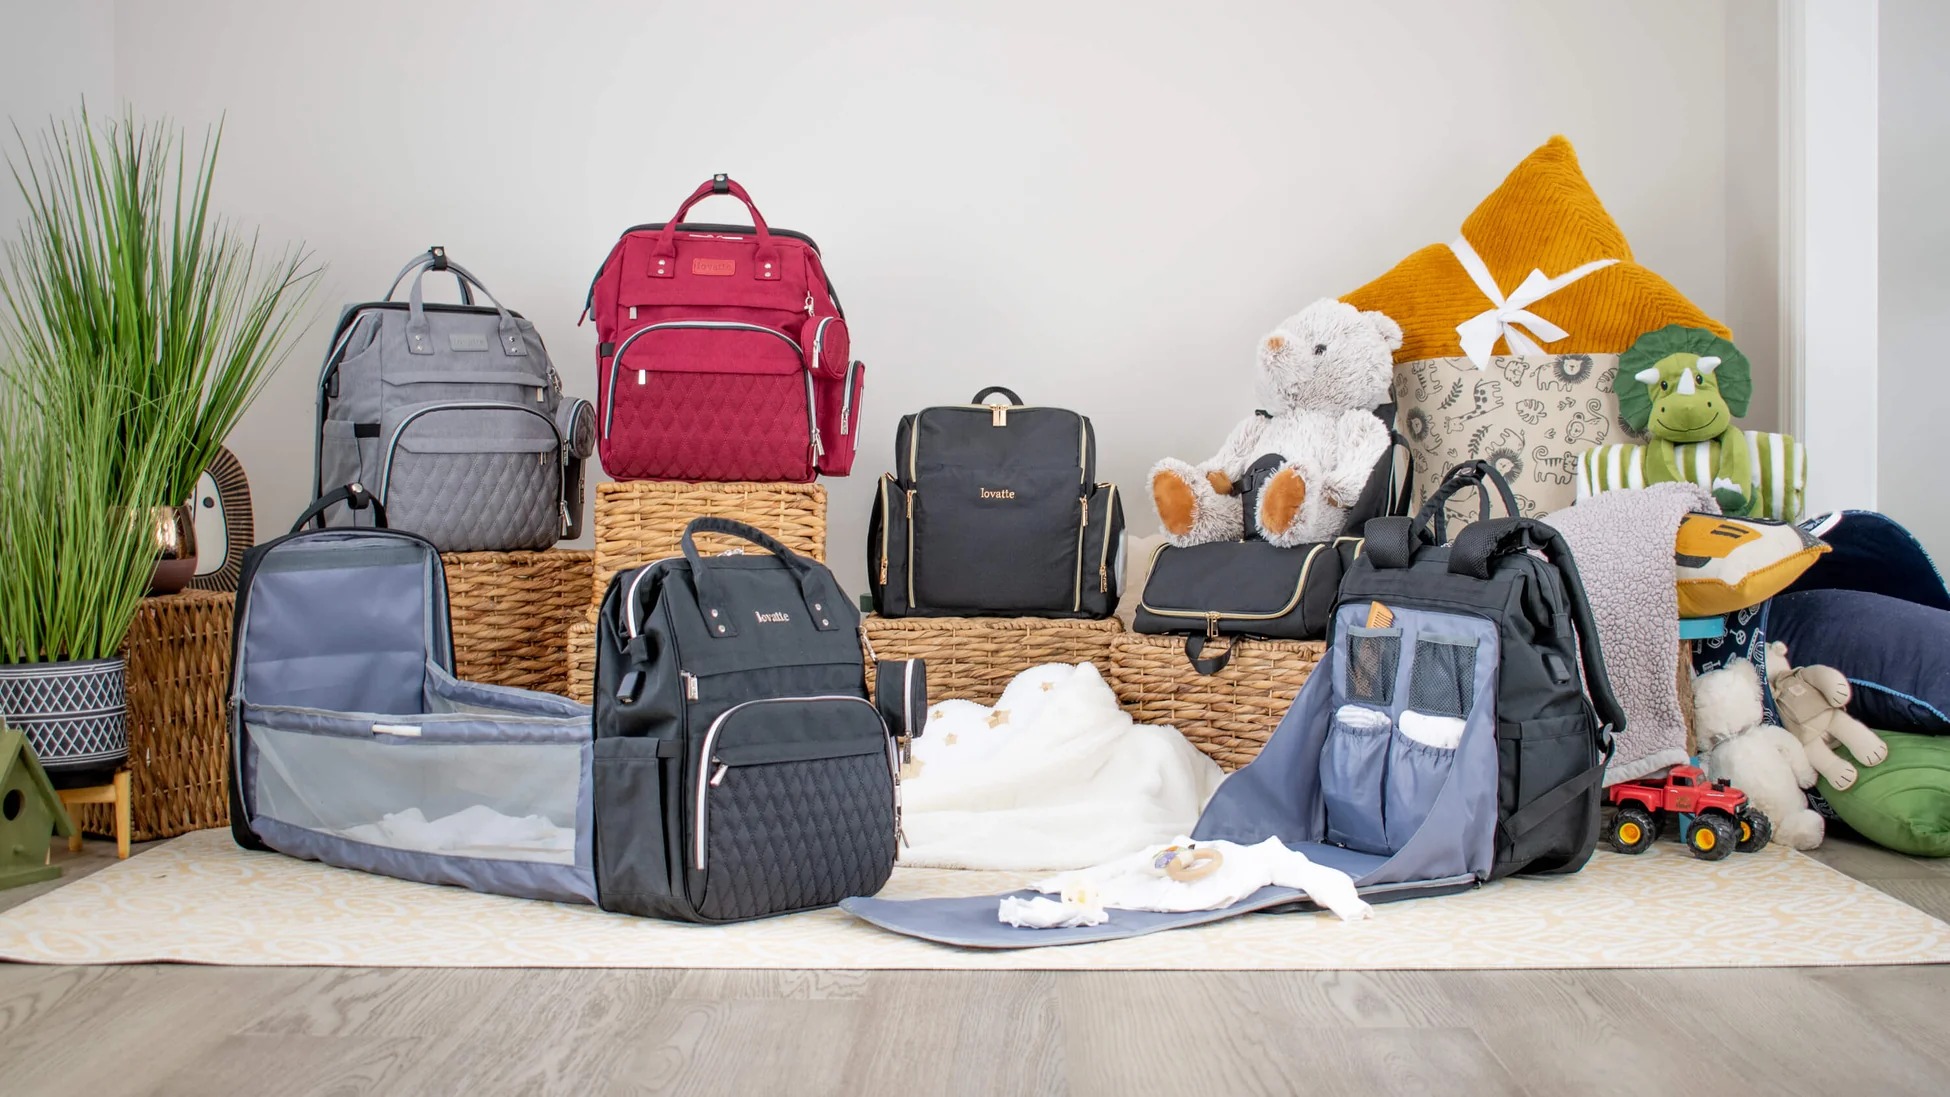 What Makes A Diaper Bag Special?